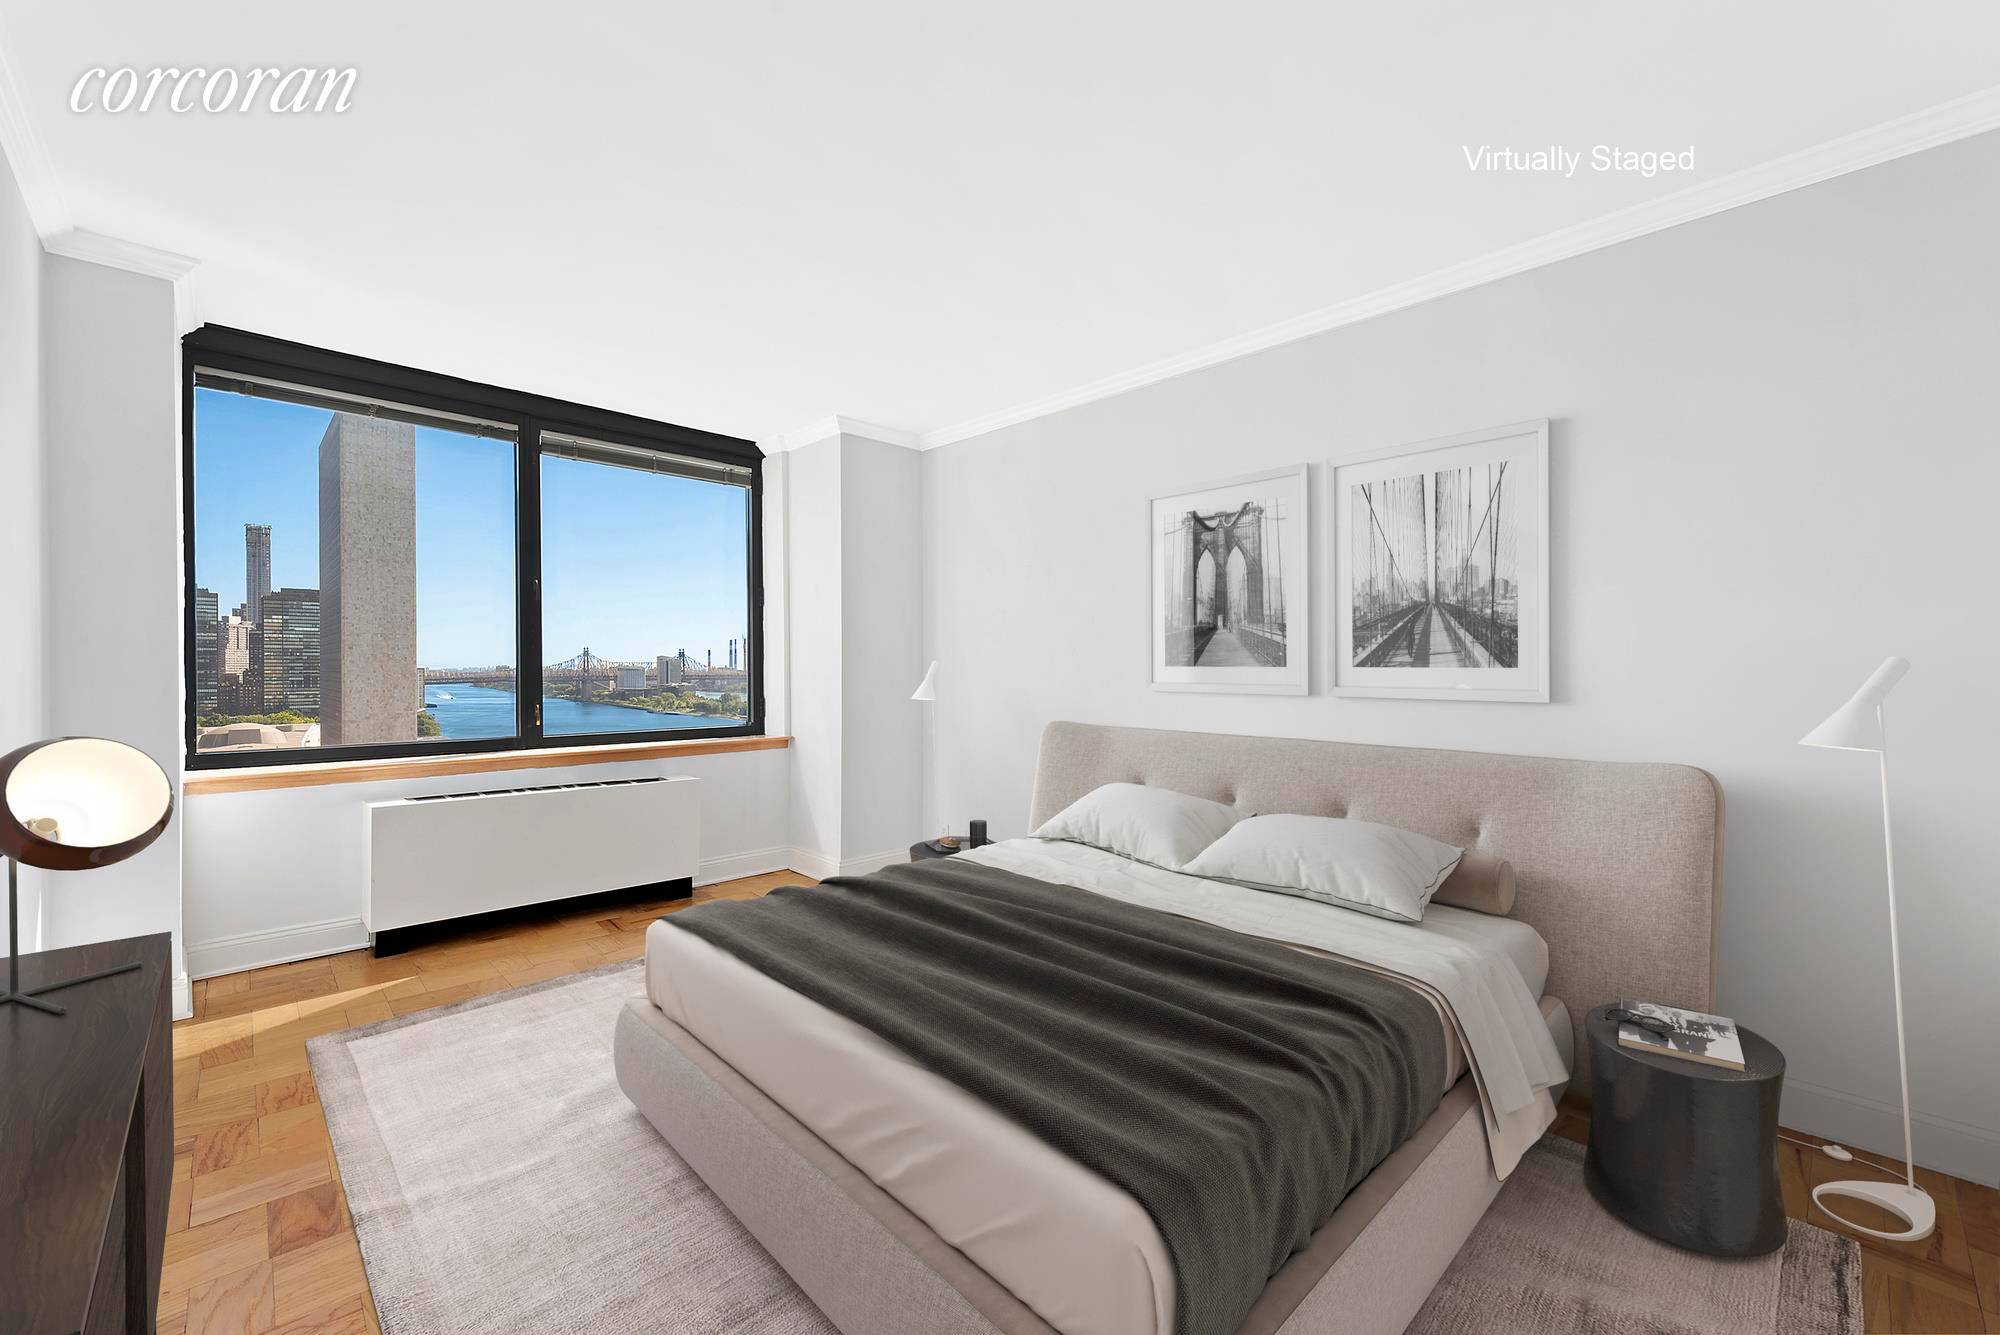 Make outstanding East River and United Nations views your daily backdrop in this magnificent, sun filled one bedroom, one bathroom home in an elite Murray Hill full service condominium.